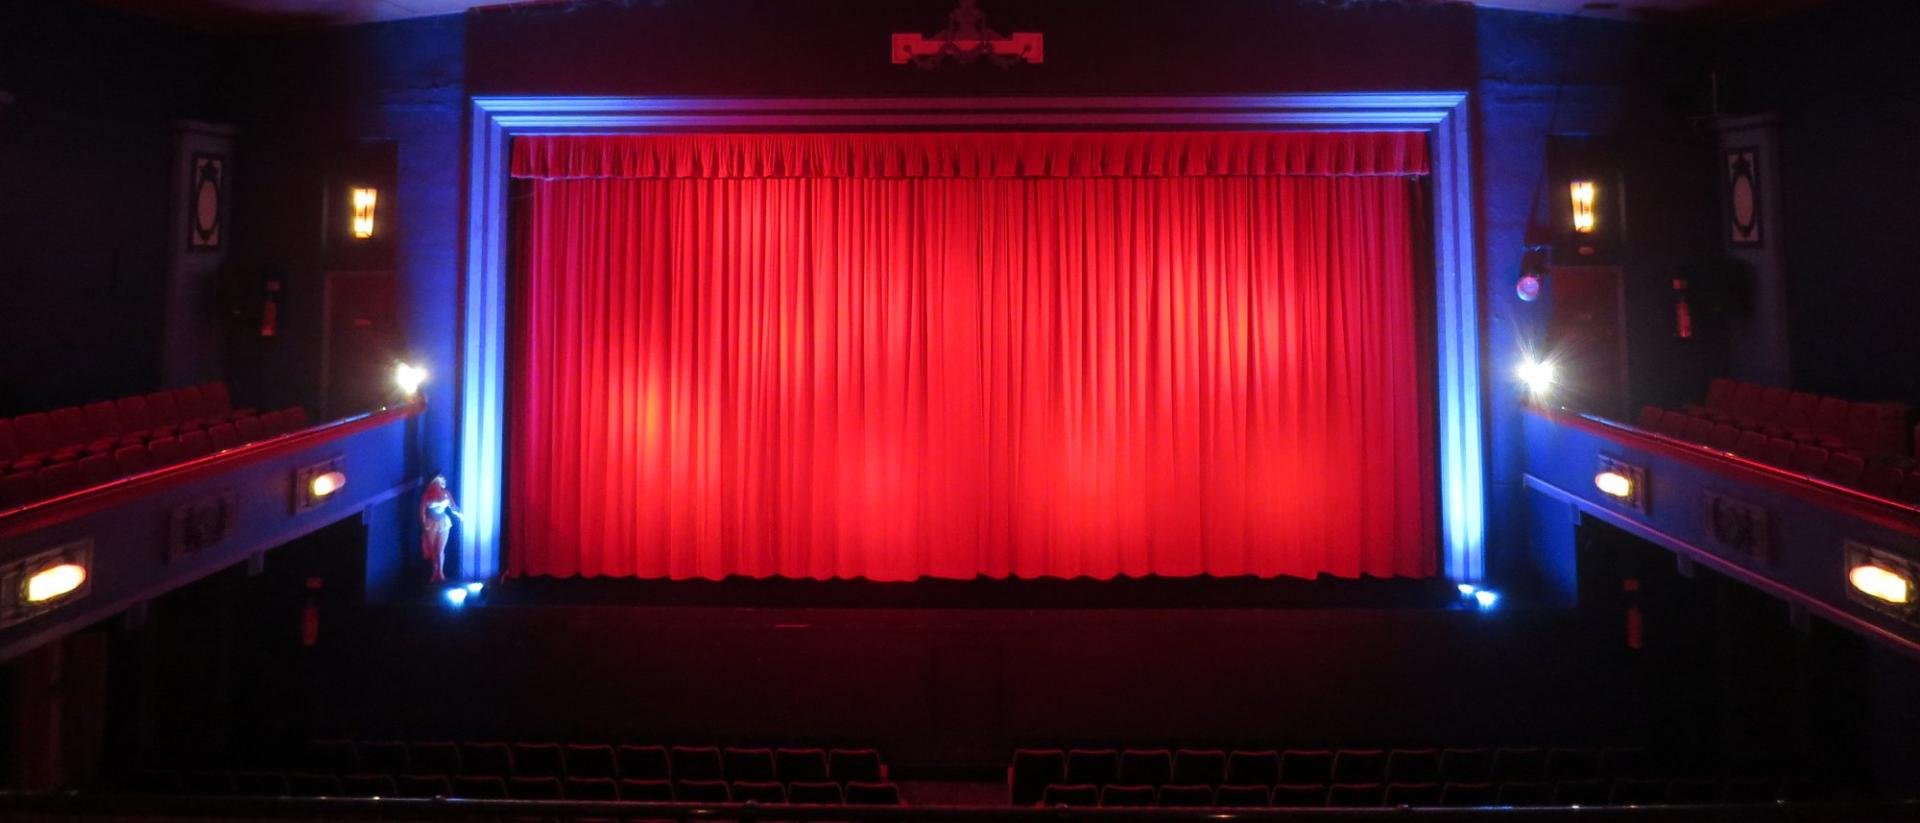 interior of an empty cinema with a red curtain over the screen